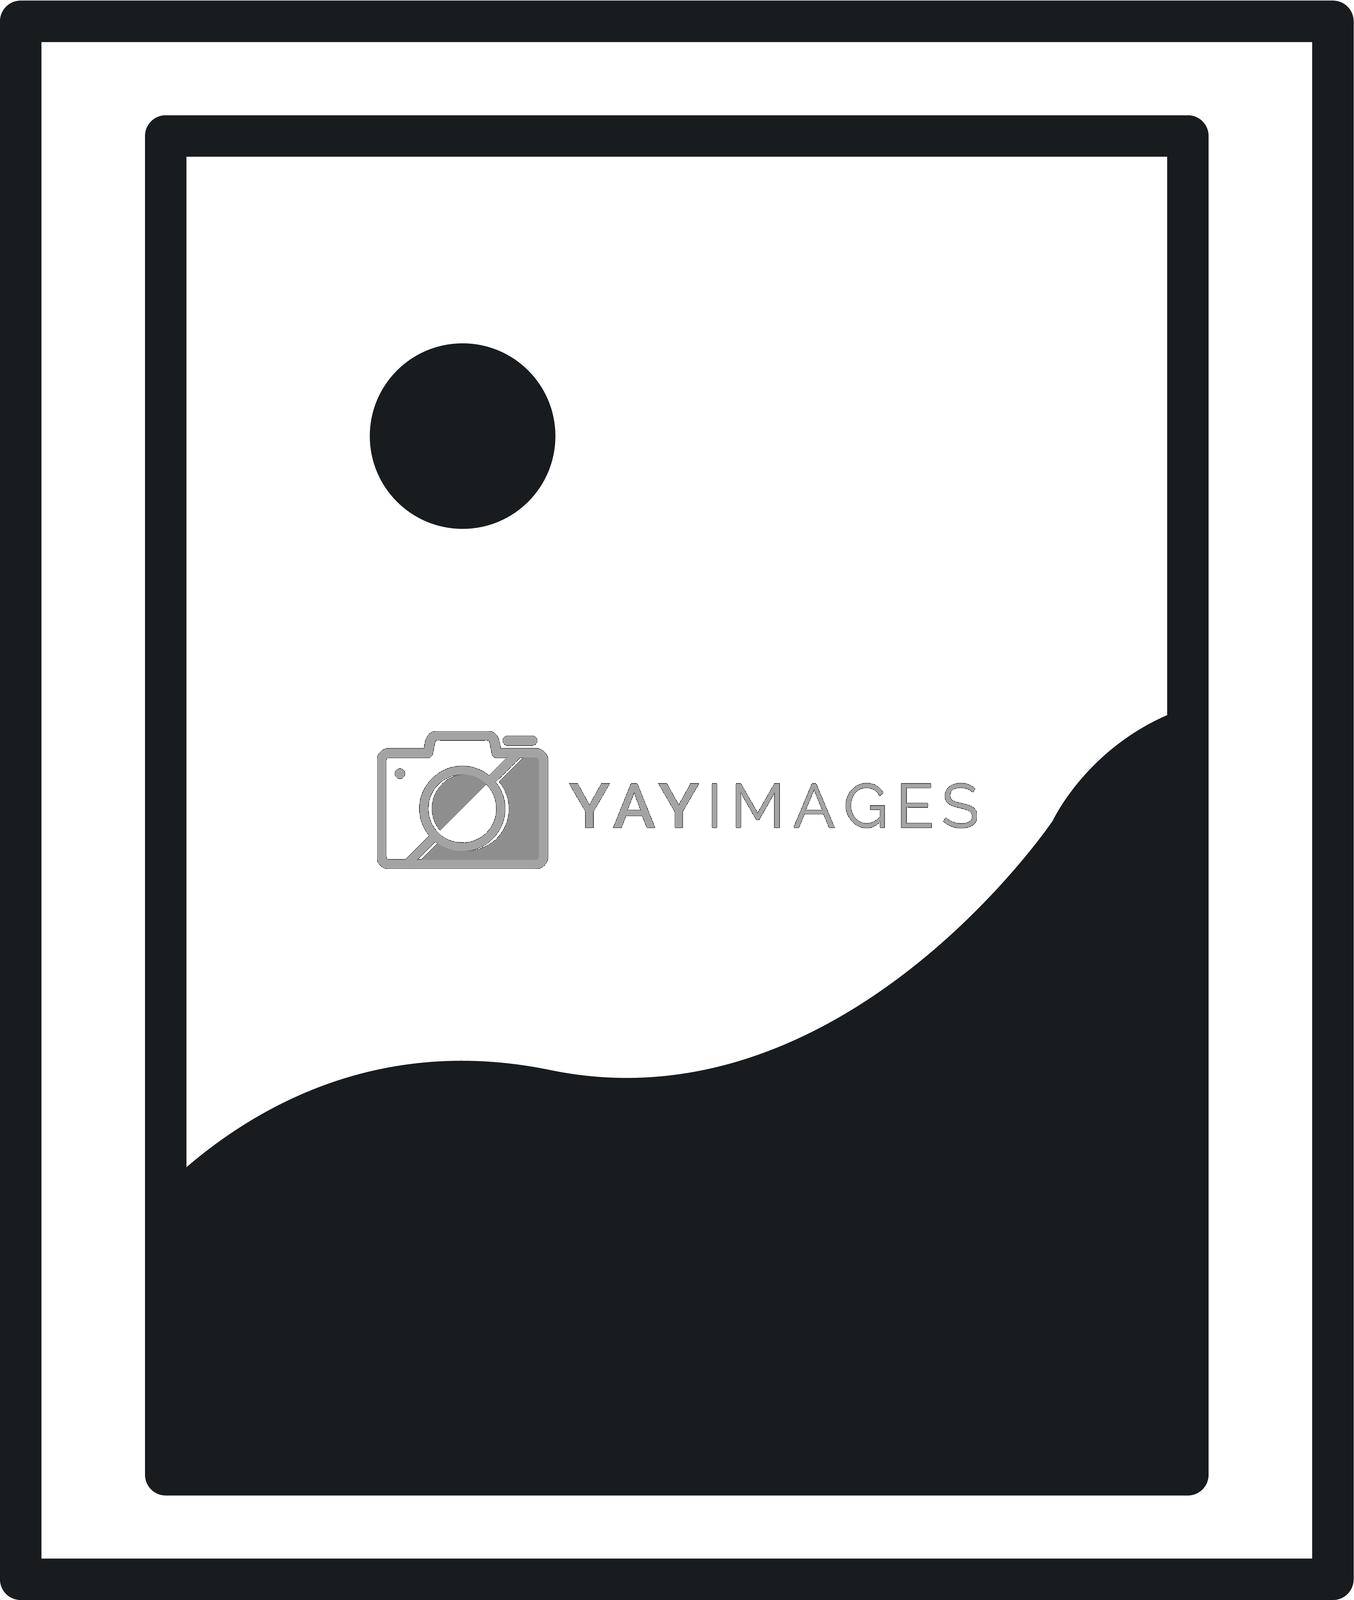 Royalty free image of Image icon. Picture in frame symbol. Photo sign by LadadikArt